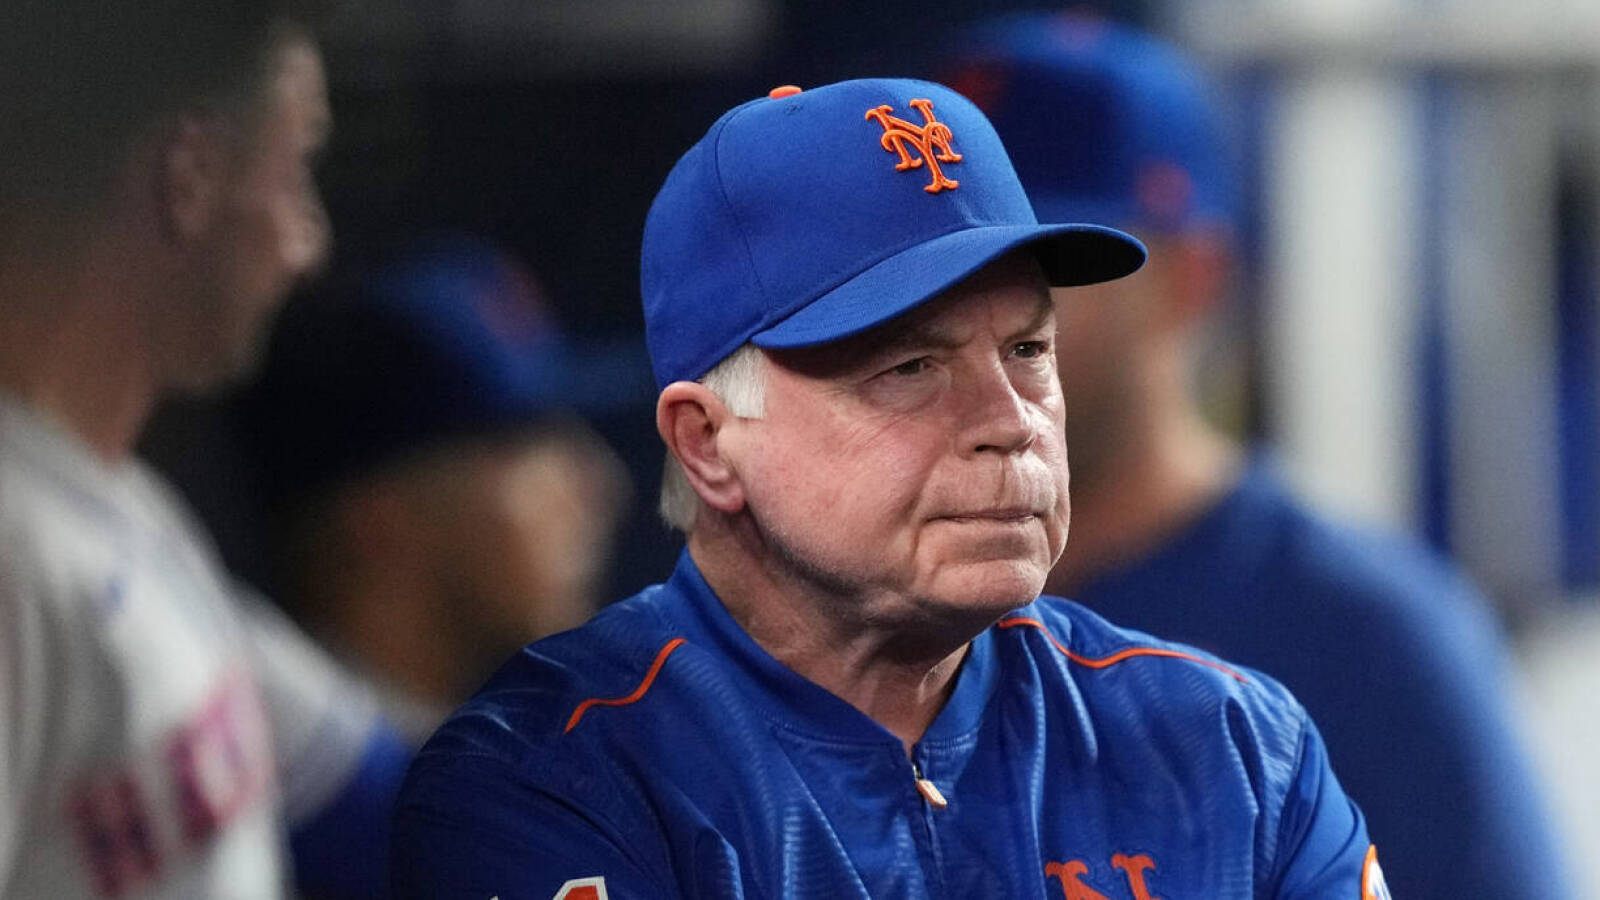 Buck Showalter has very strong opinions on baseball load management